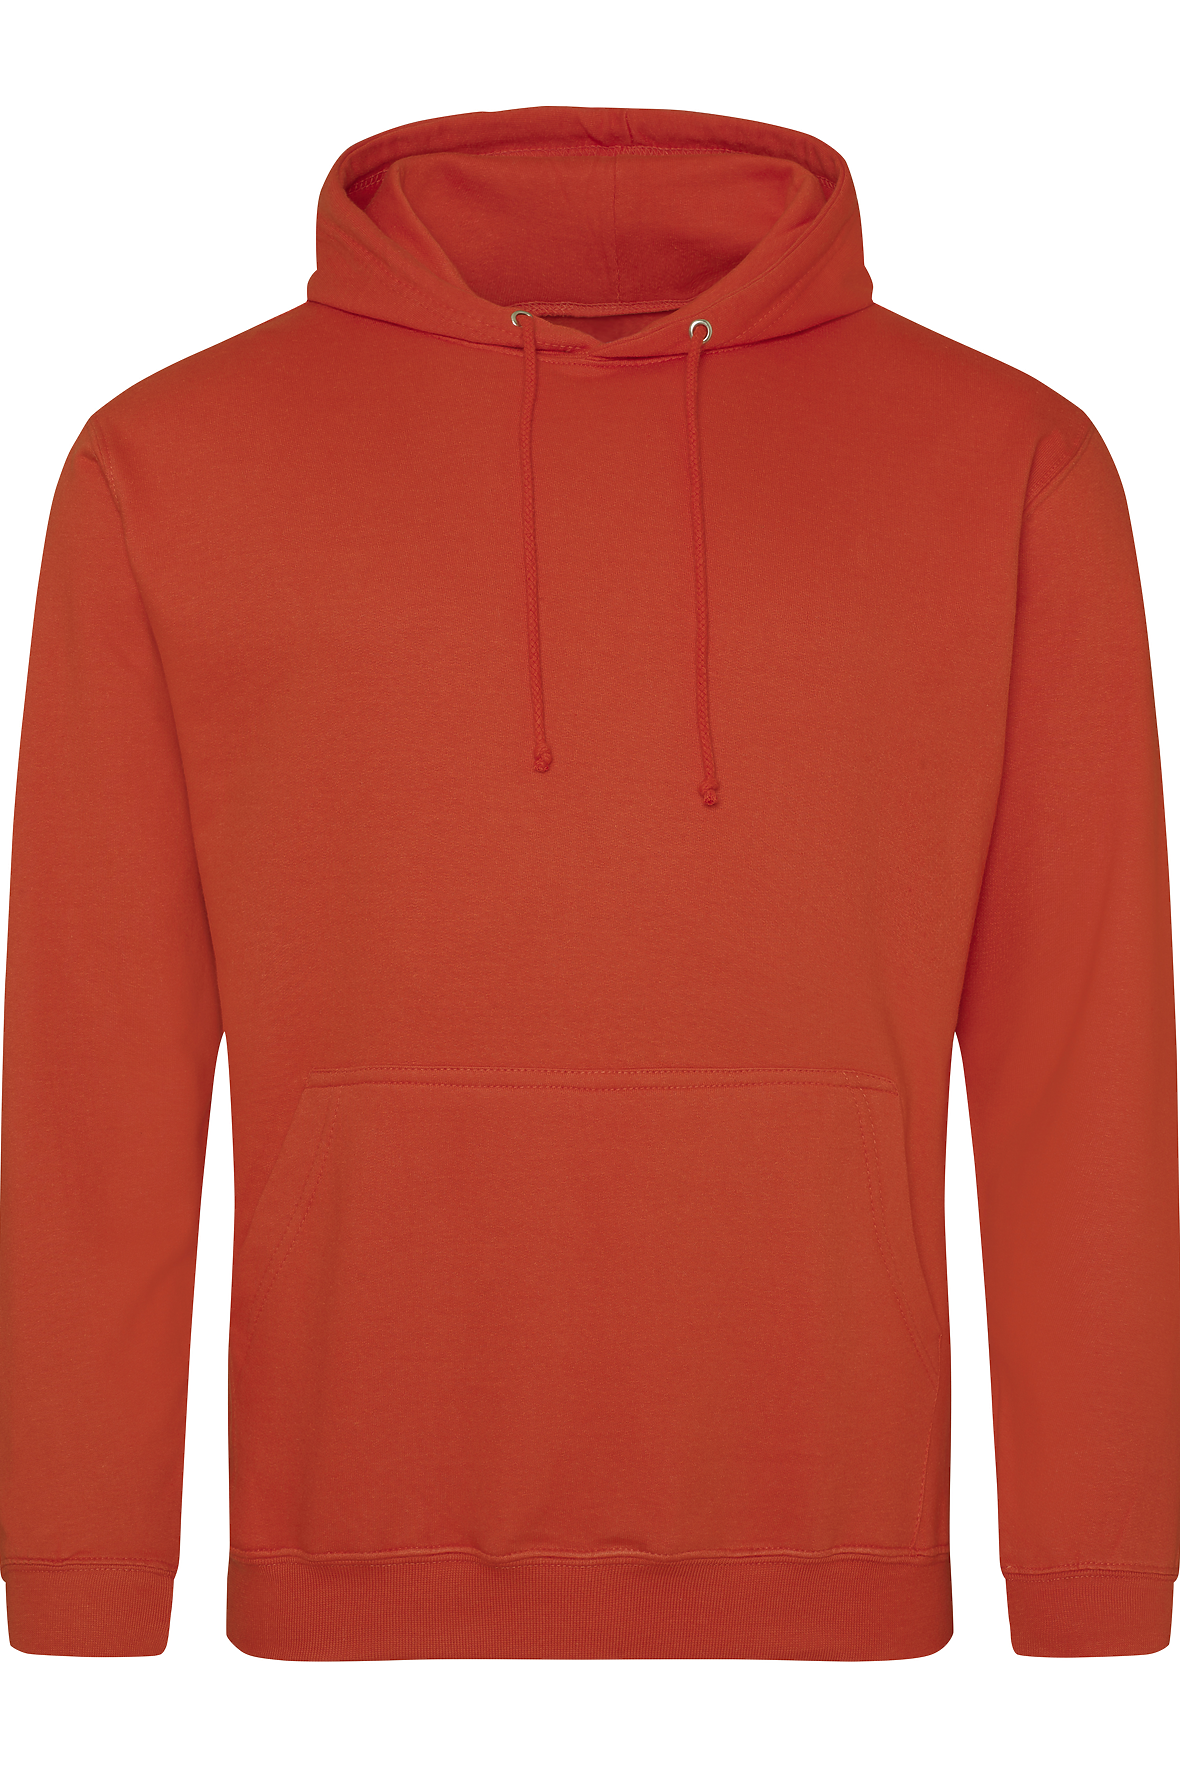 Just Hoods JHA001 College Hoodie - Red Hot Chilli